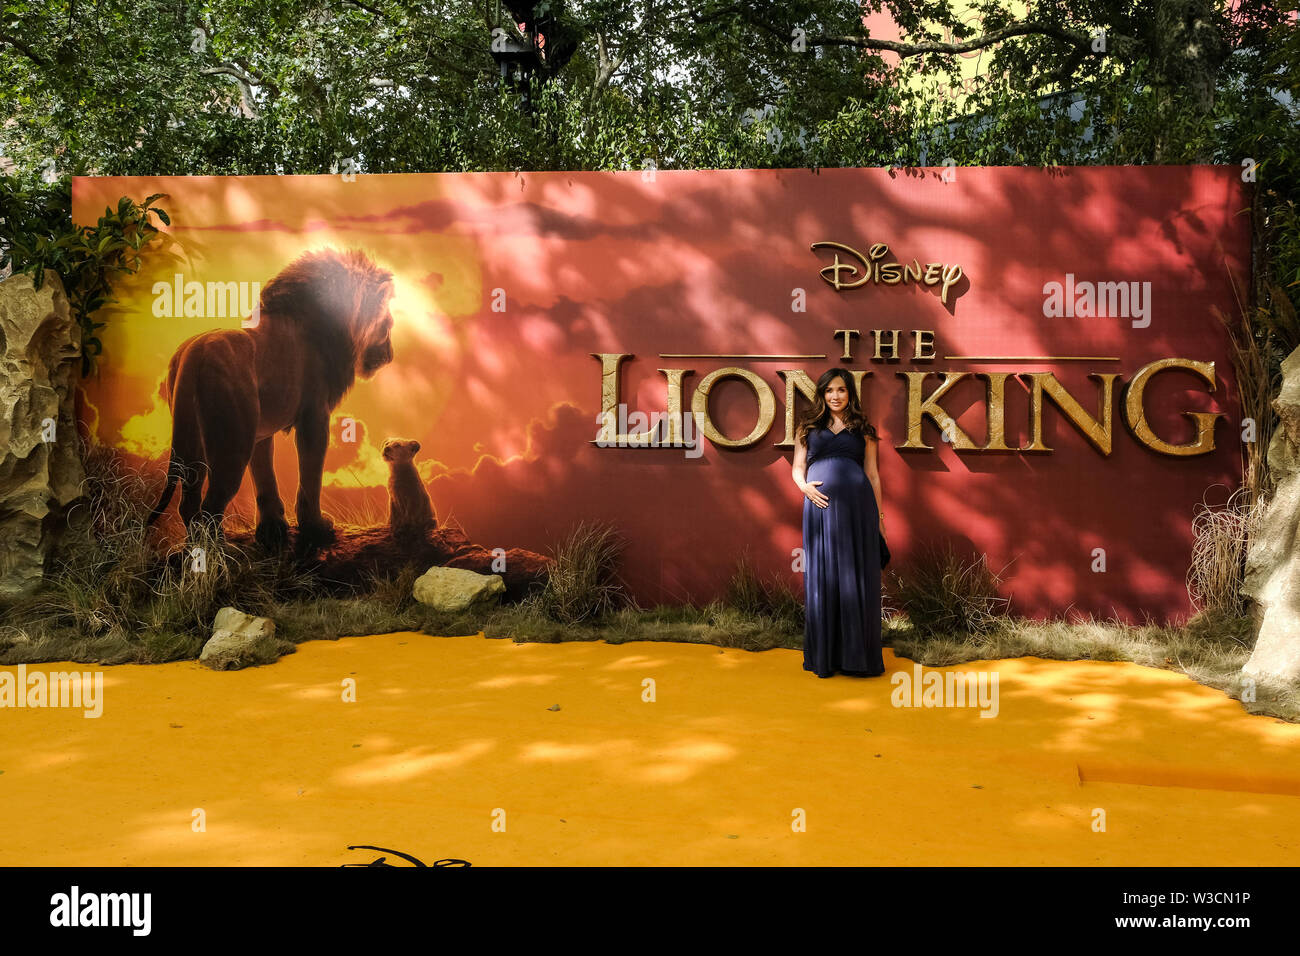 London, UK. 14th July 2019. Myleene Klass poses on the yellow carpet at the European premiere of Disneys 'The Lion King' on Sunday 14 July 2019 at ODEON LUXE Leicester Square, London. . Picture by Julie Edwards. Credit: Julie Edwards/Alamy Live News Stock Photo